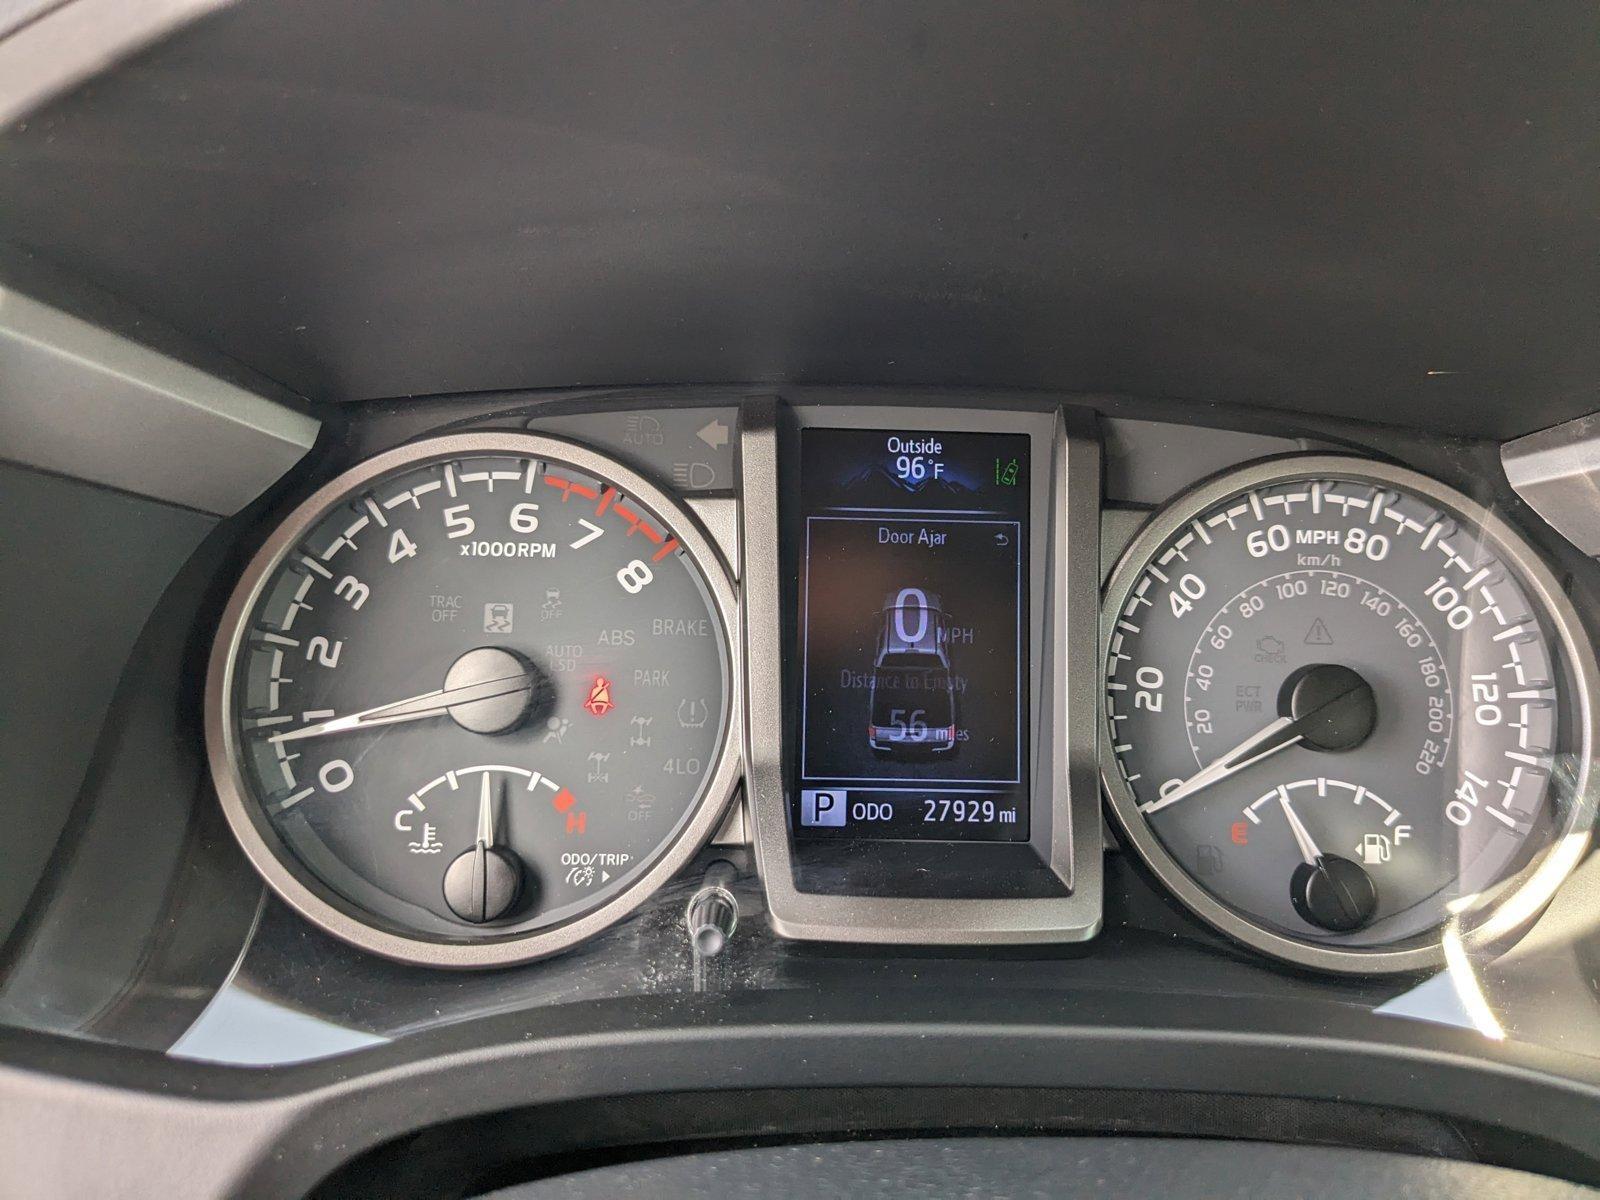 2020 Toyota Tacoma 2WD Vehicle Photo in Winter Park, FL 32792